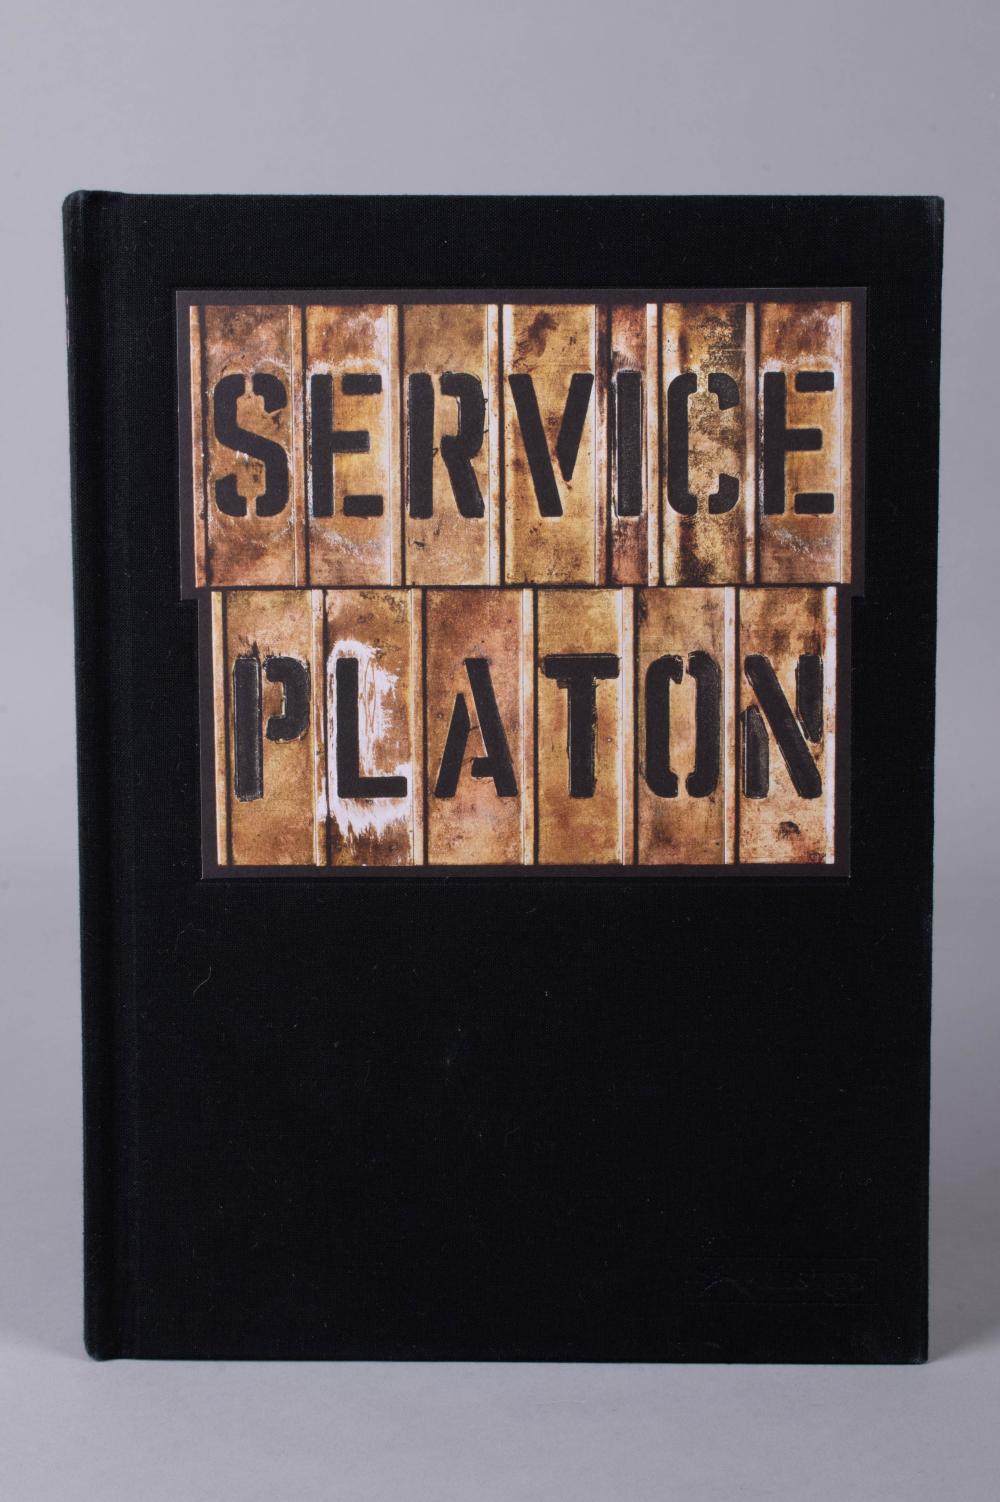 PLATON SERVICE SIGNED AND INSCRIBED 33d123